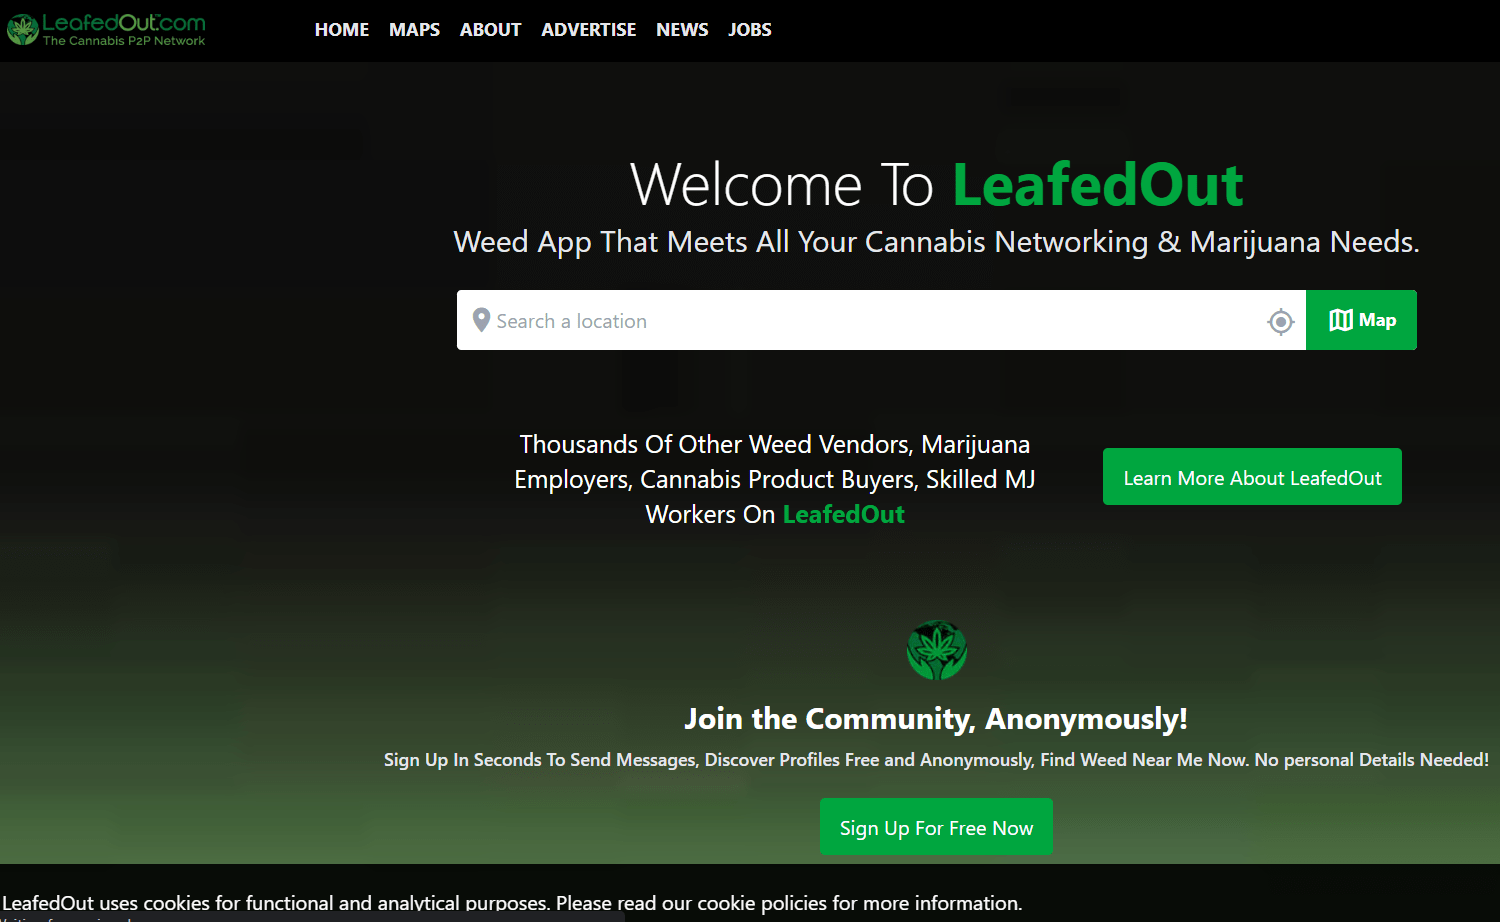 Leafedout